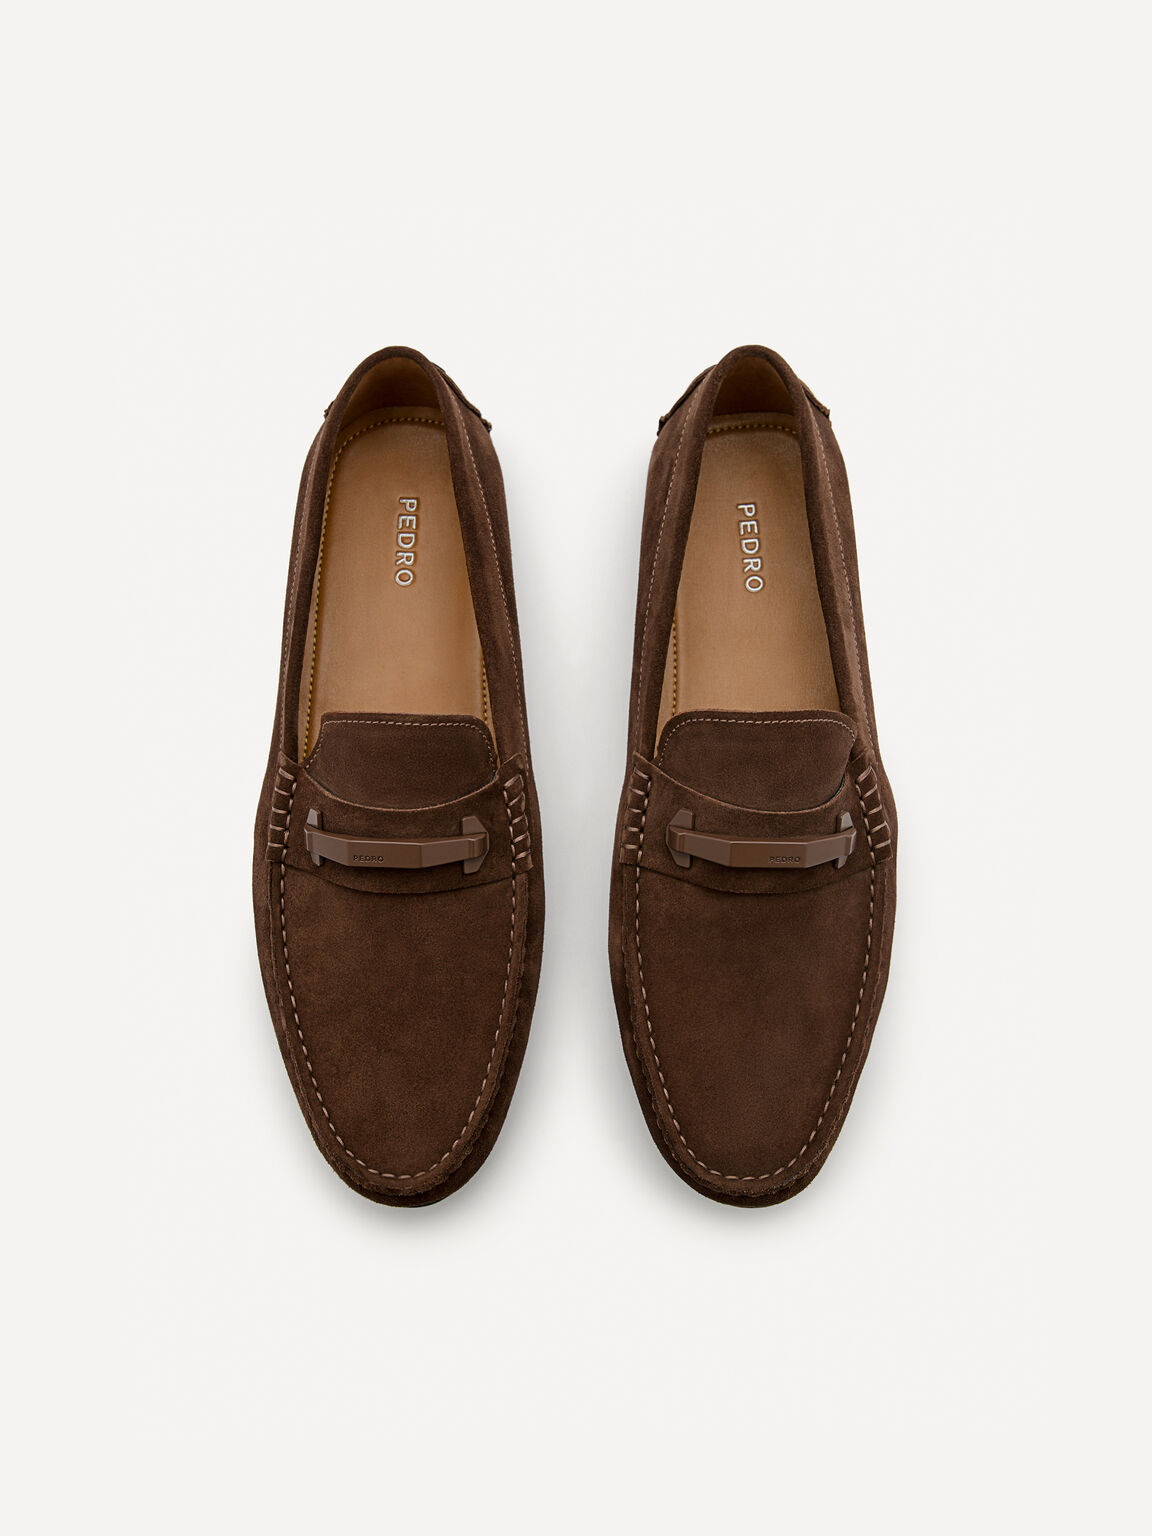 Leather Hardware Moccasins, Brown